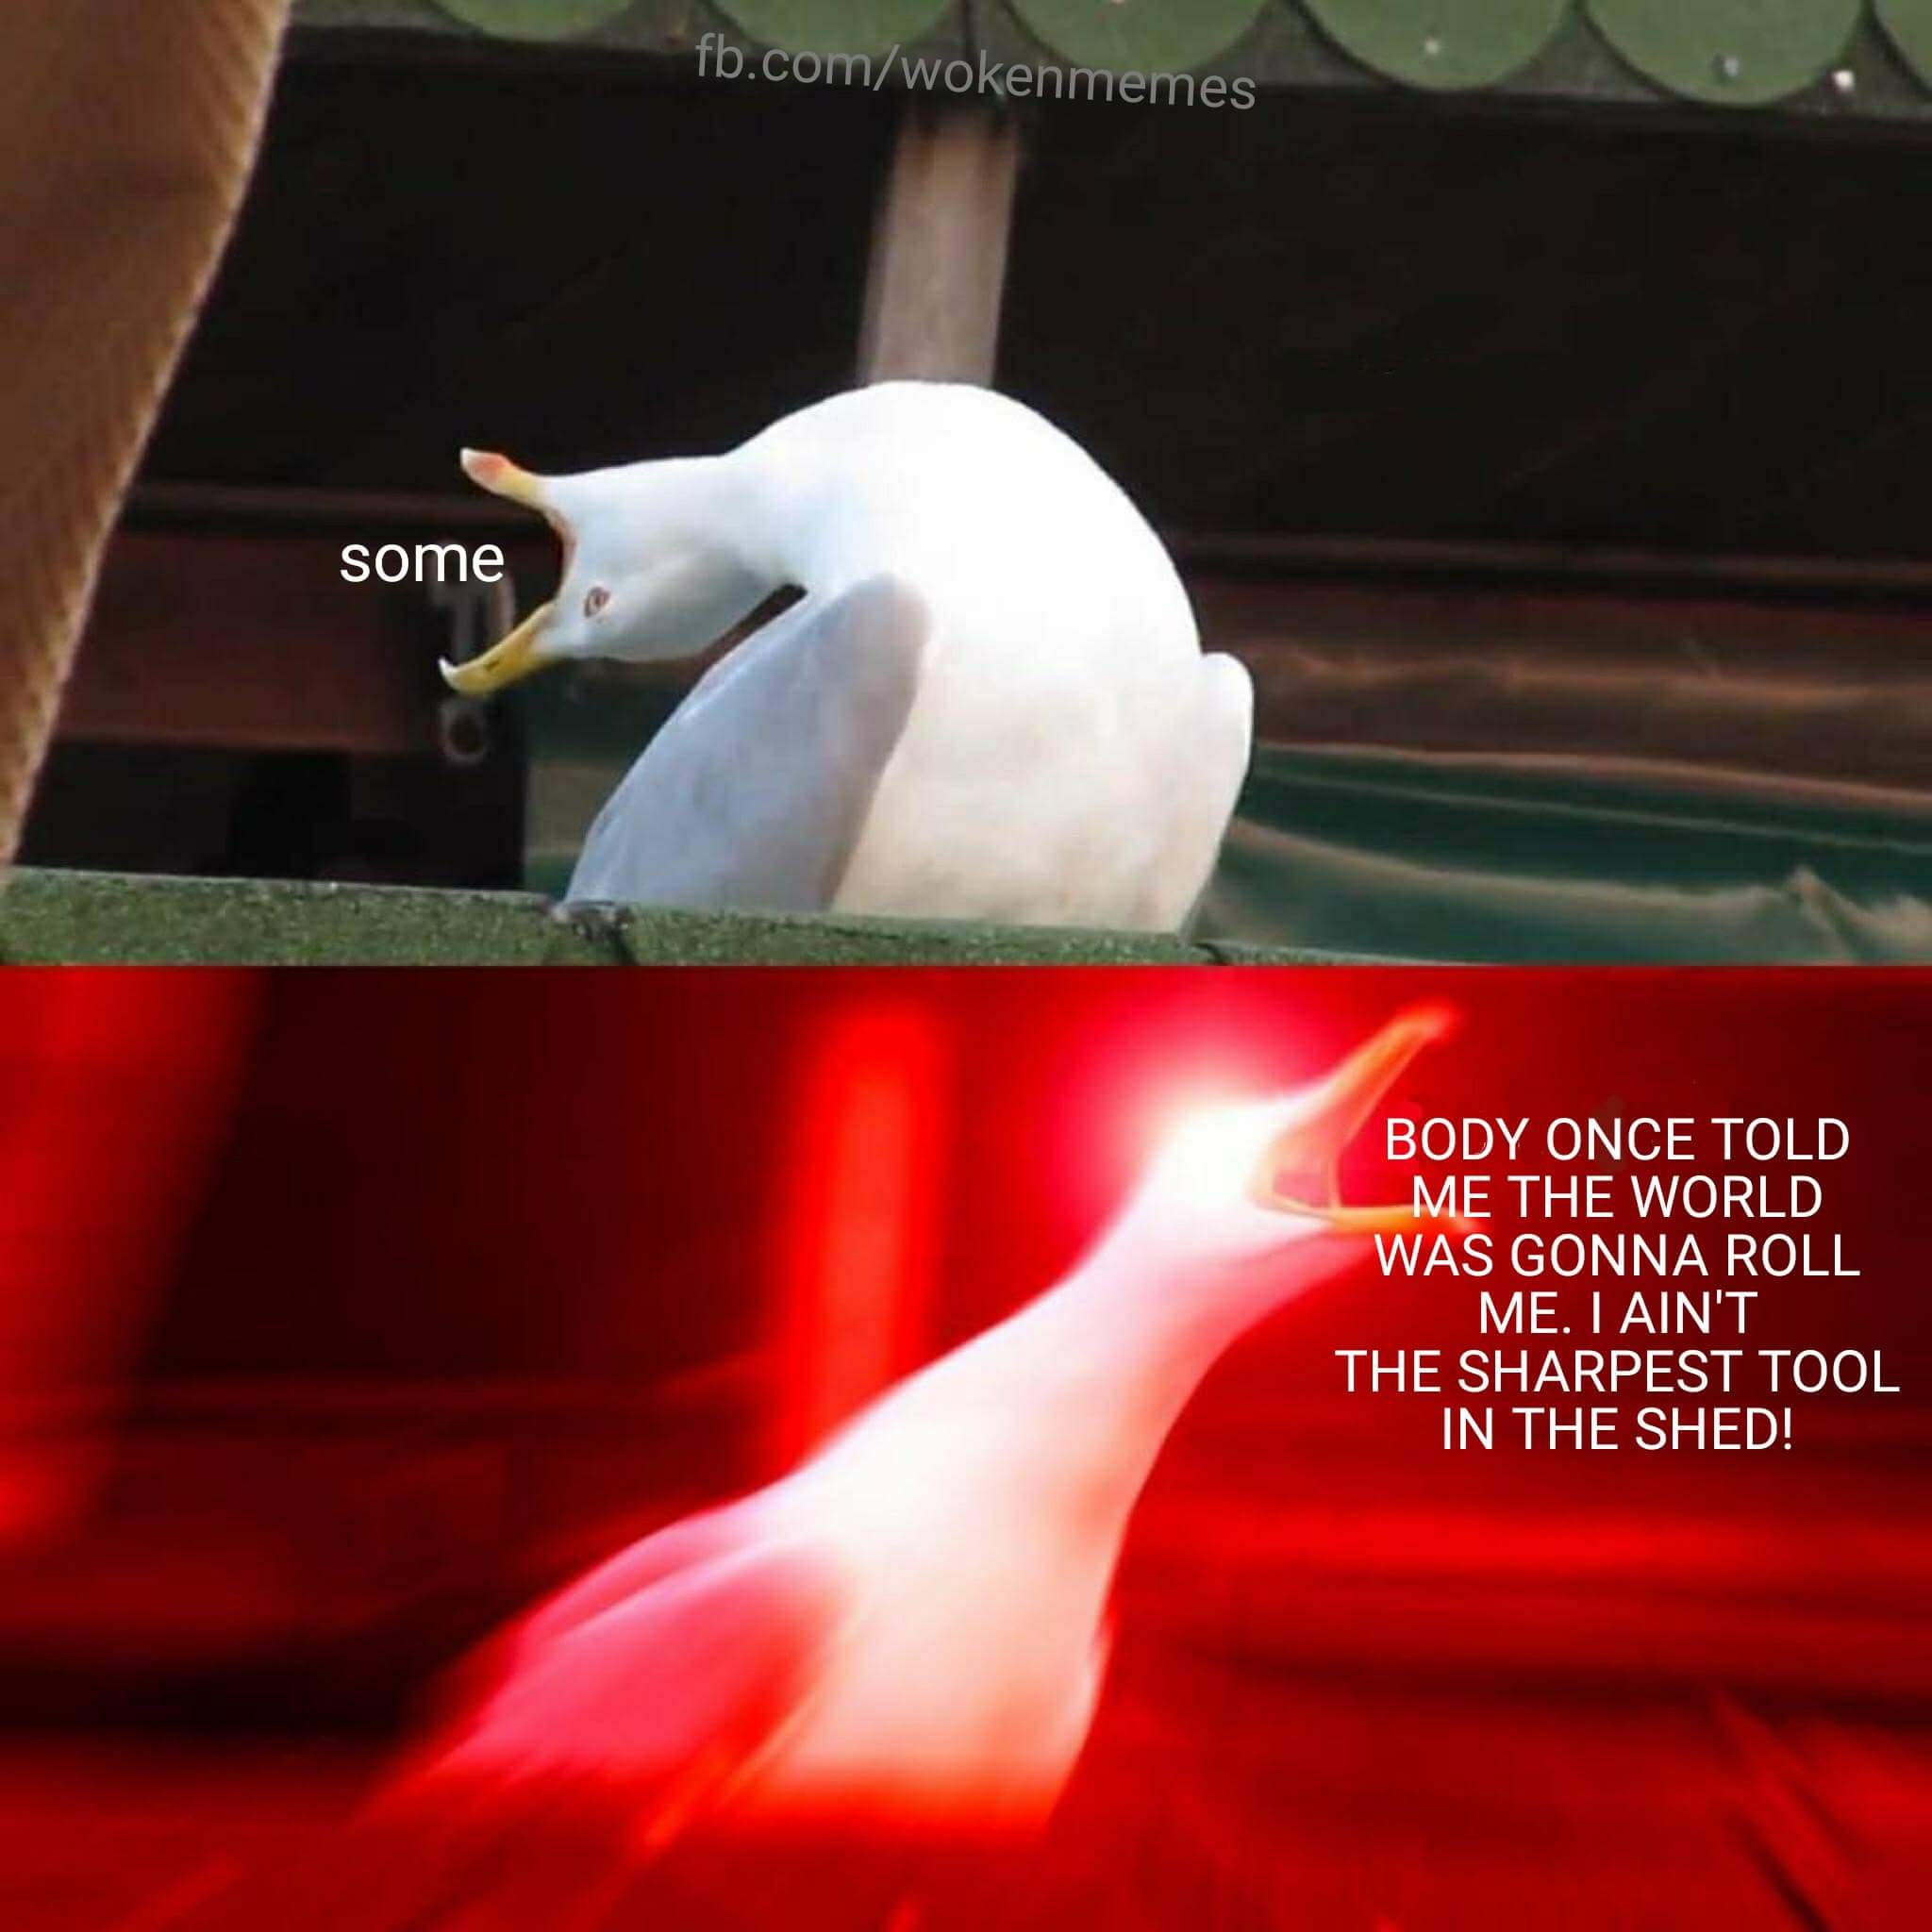 seagull meme - fb.comwokenmemes some Body Once Told Me The World Was Gonna Roll Me. I Ain'T The Sharpest Tool In The Shed!